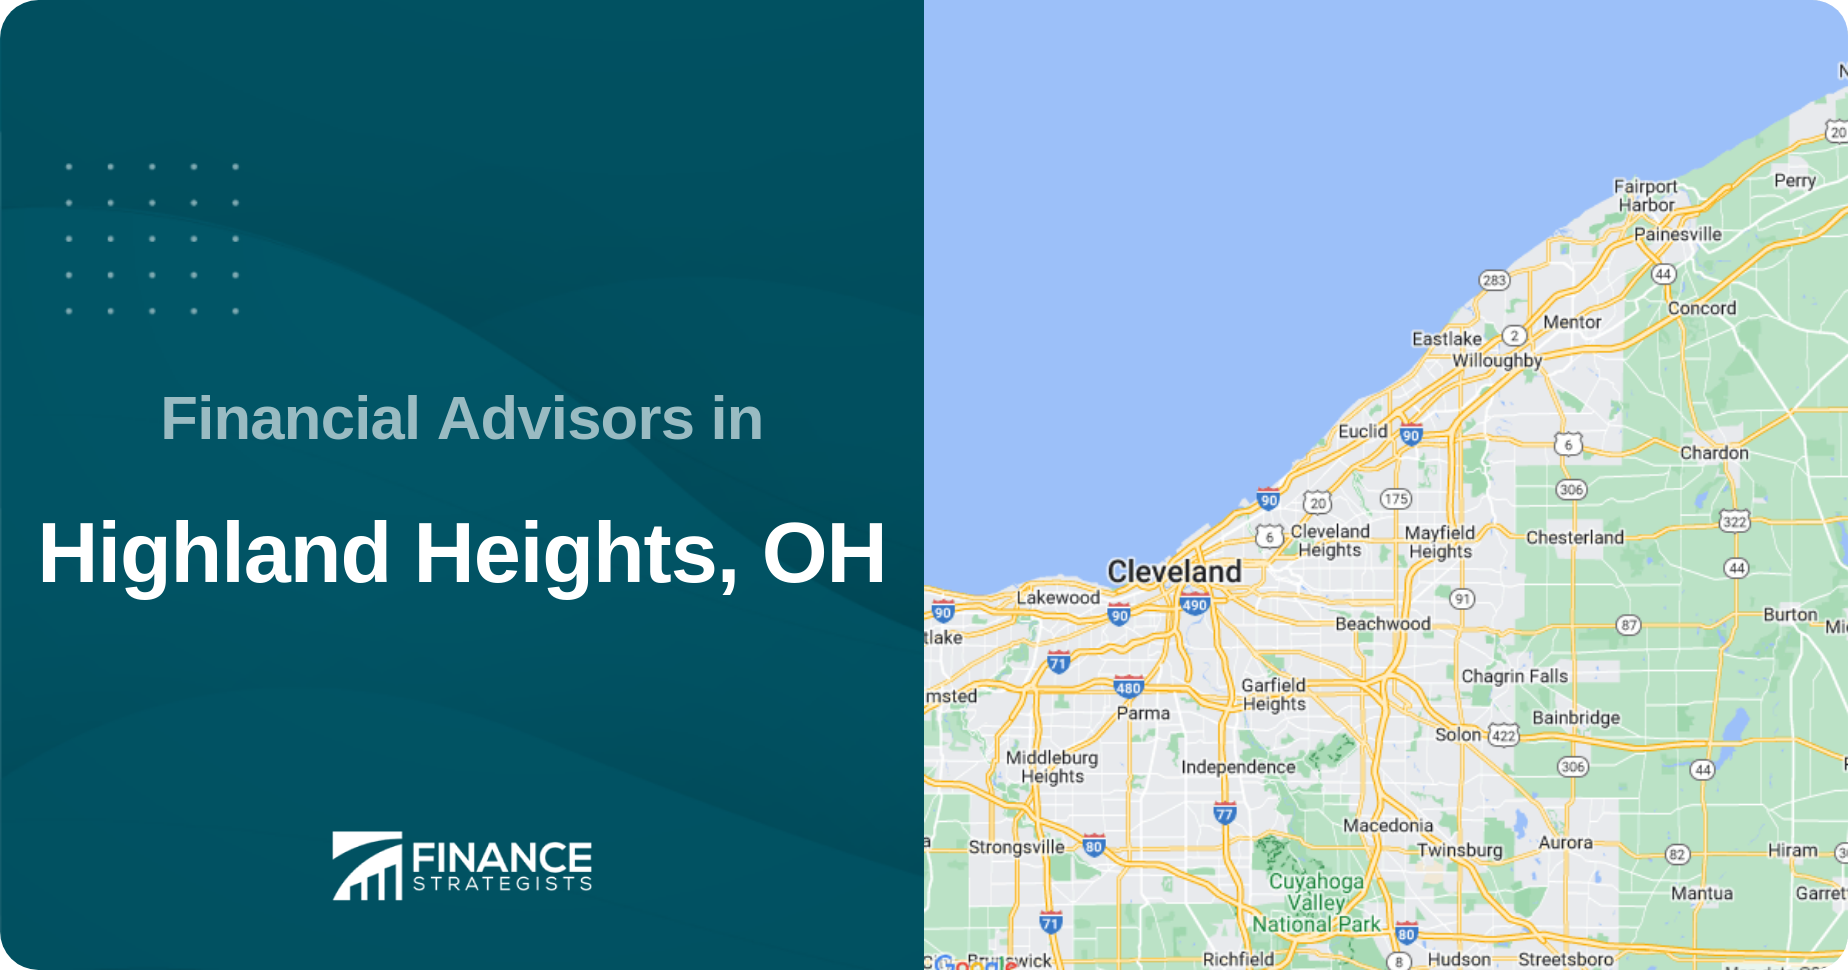 Financial Advisors in Highland Heights, OH